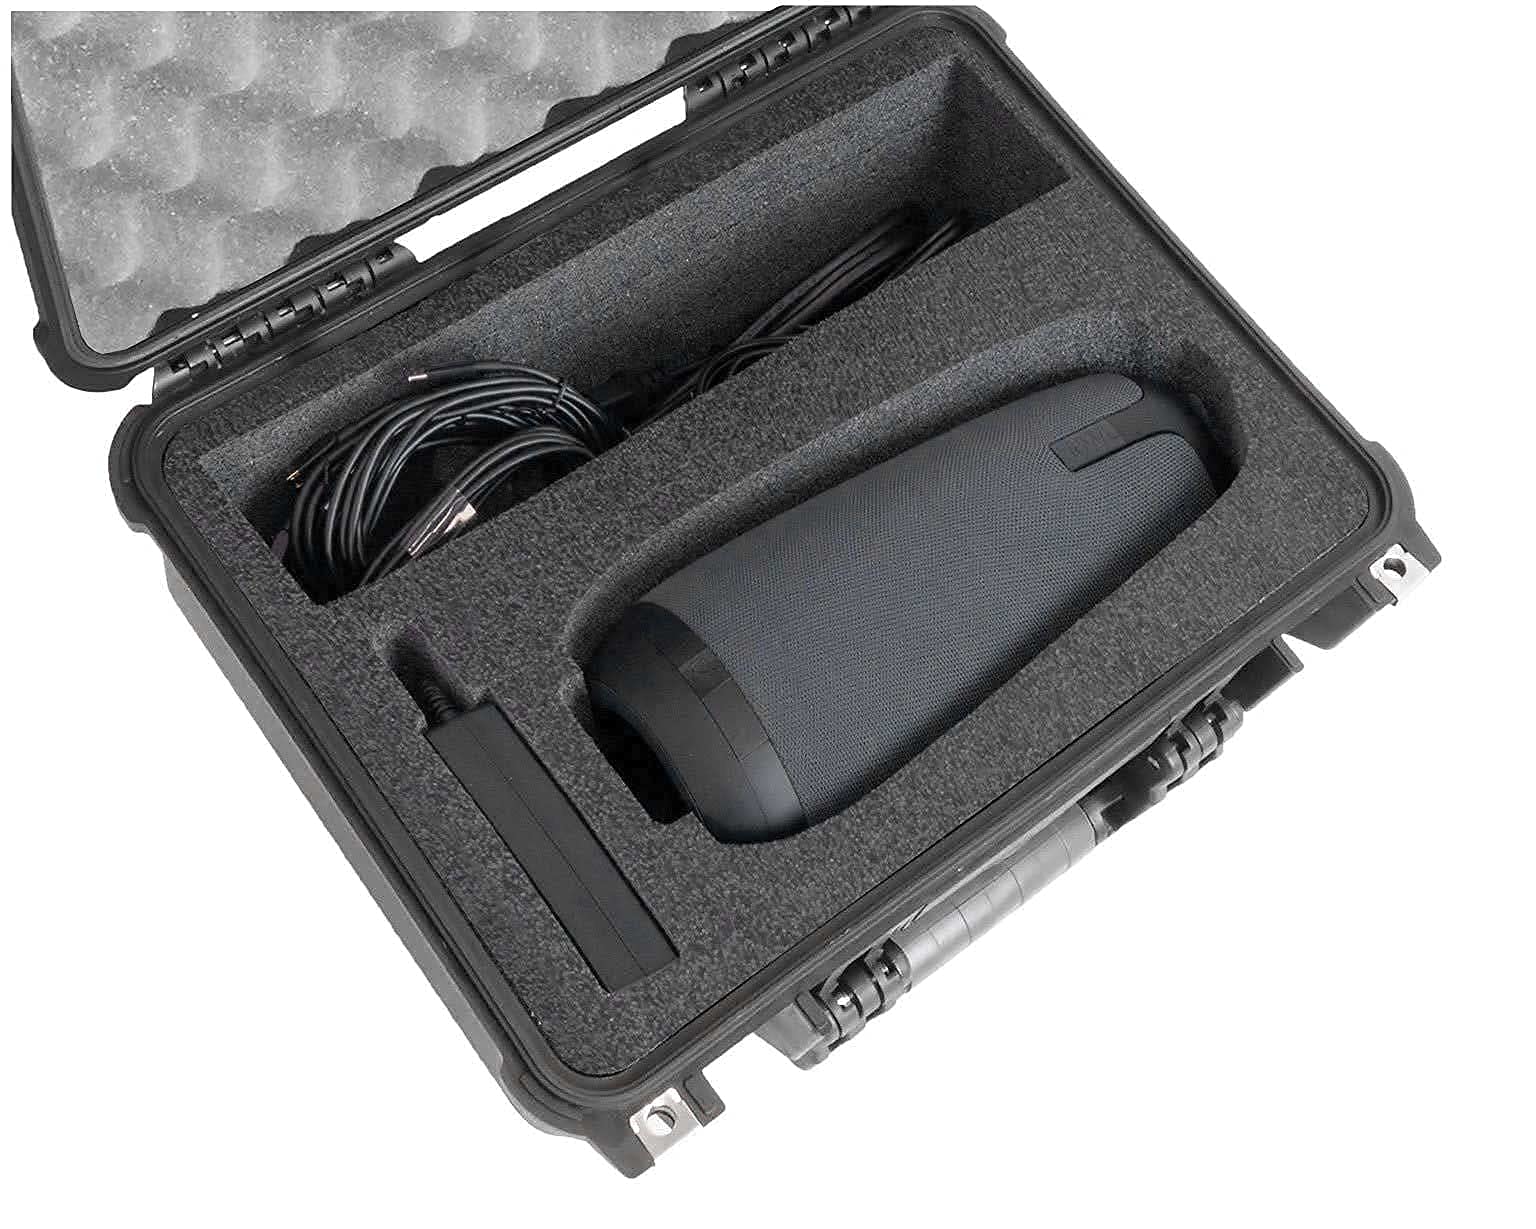 Case Club Case to Fit Meeting Owl - Heavy Duty Waterproof Case Fits Meeting Owl Standard, Pro, 2 or 3- Pre-Cut Foam is Ready To Go Out of The Box- Holds Expansion Mic, Cords, Accessories & Lock Adapter